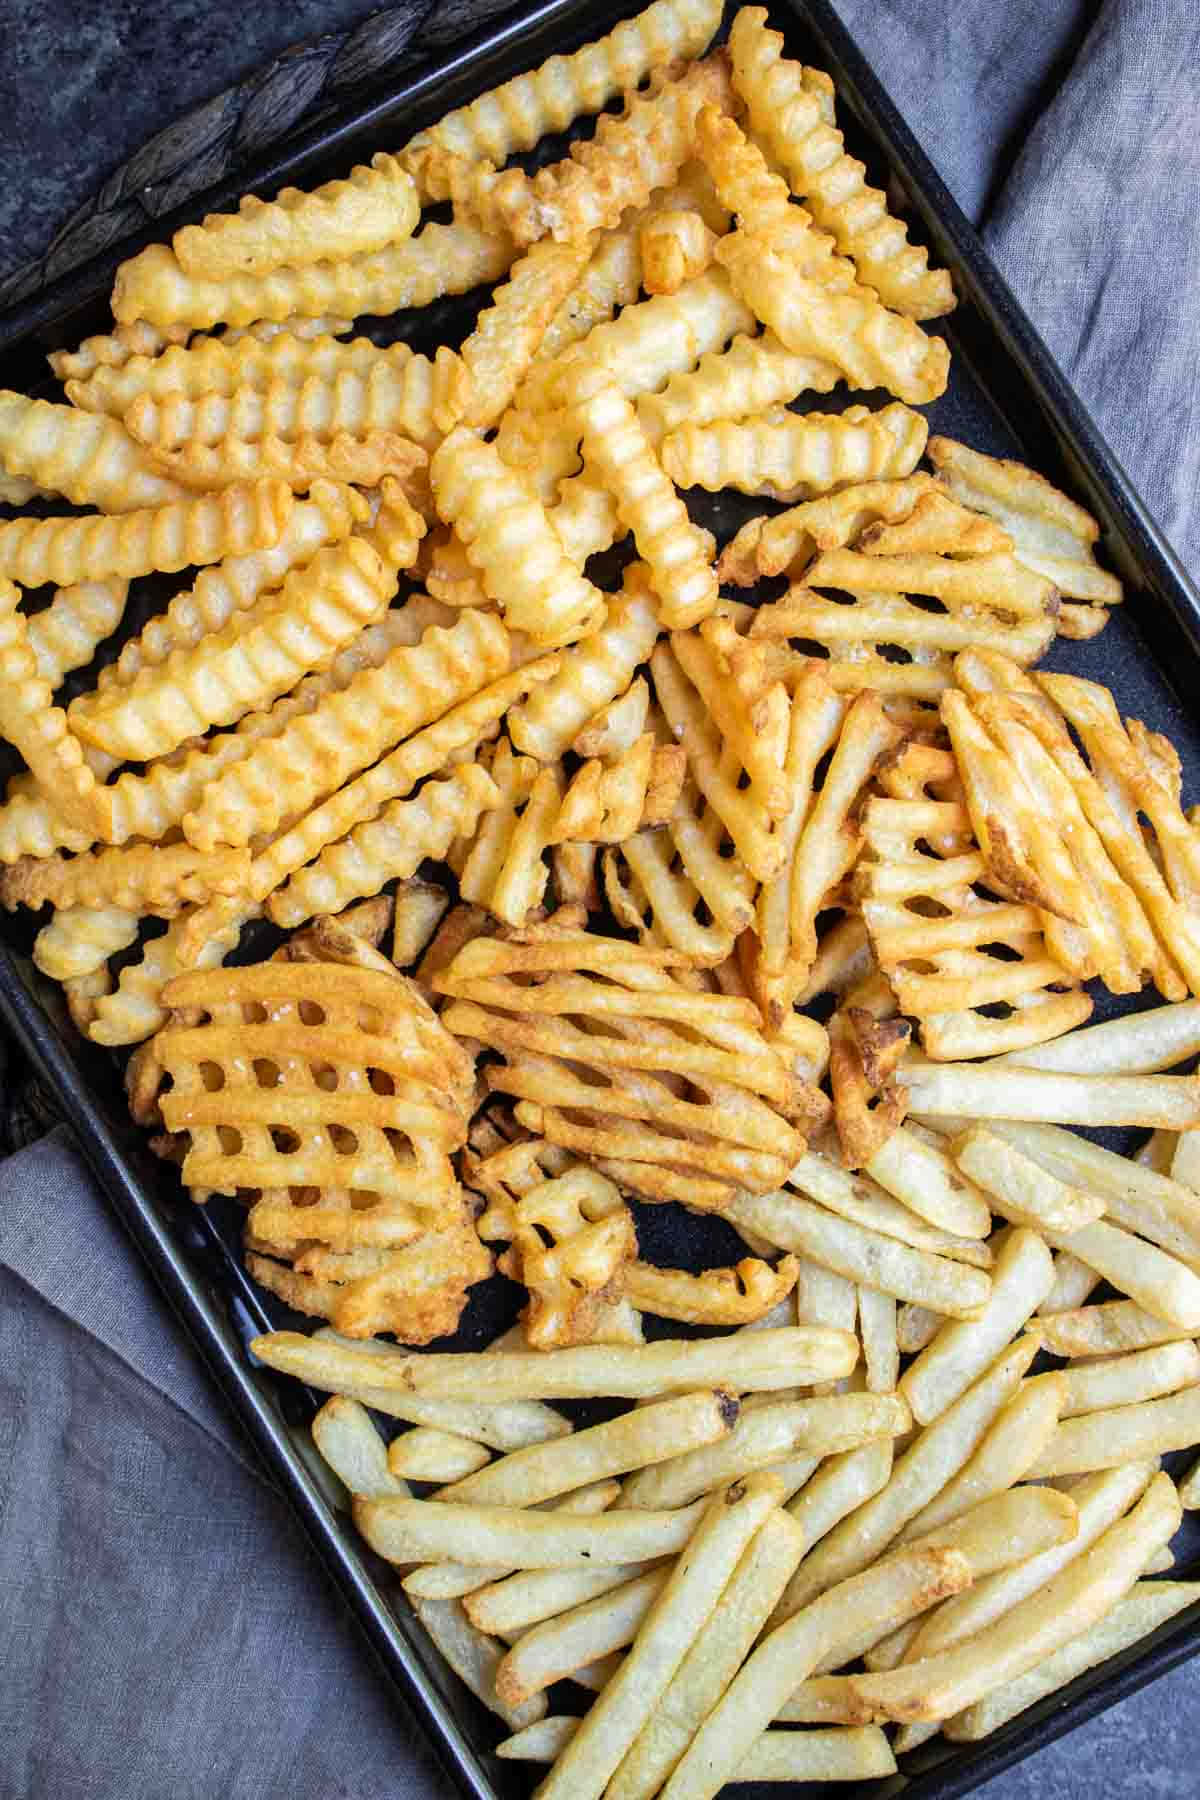 Mouthwatering Pile of Golden French Fries